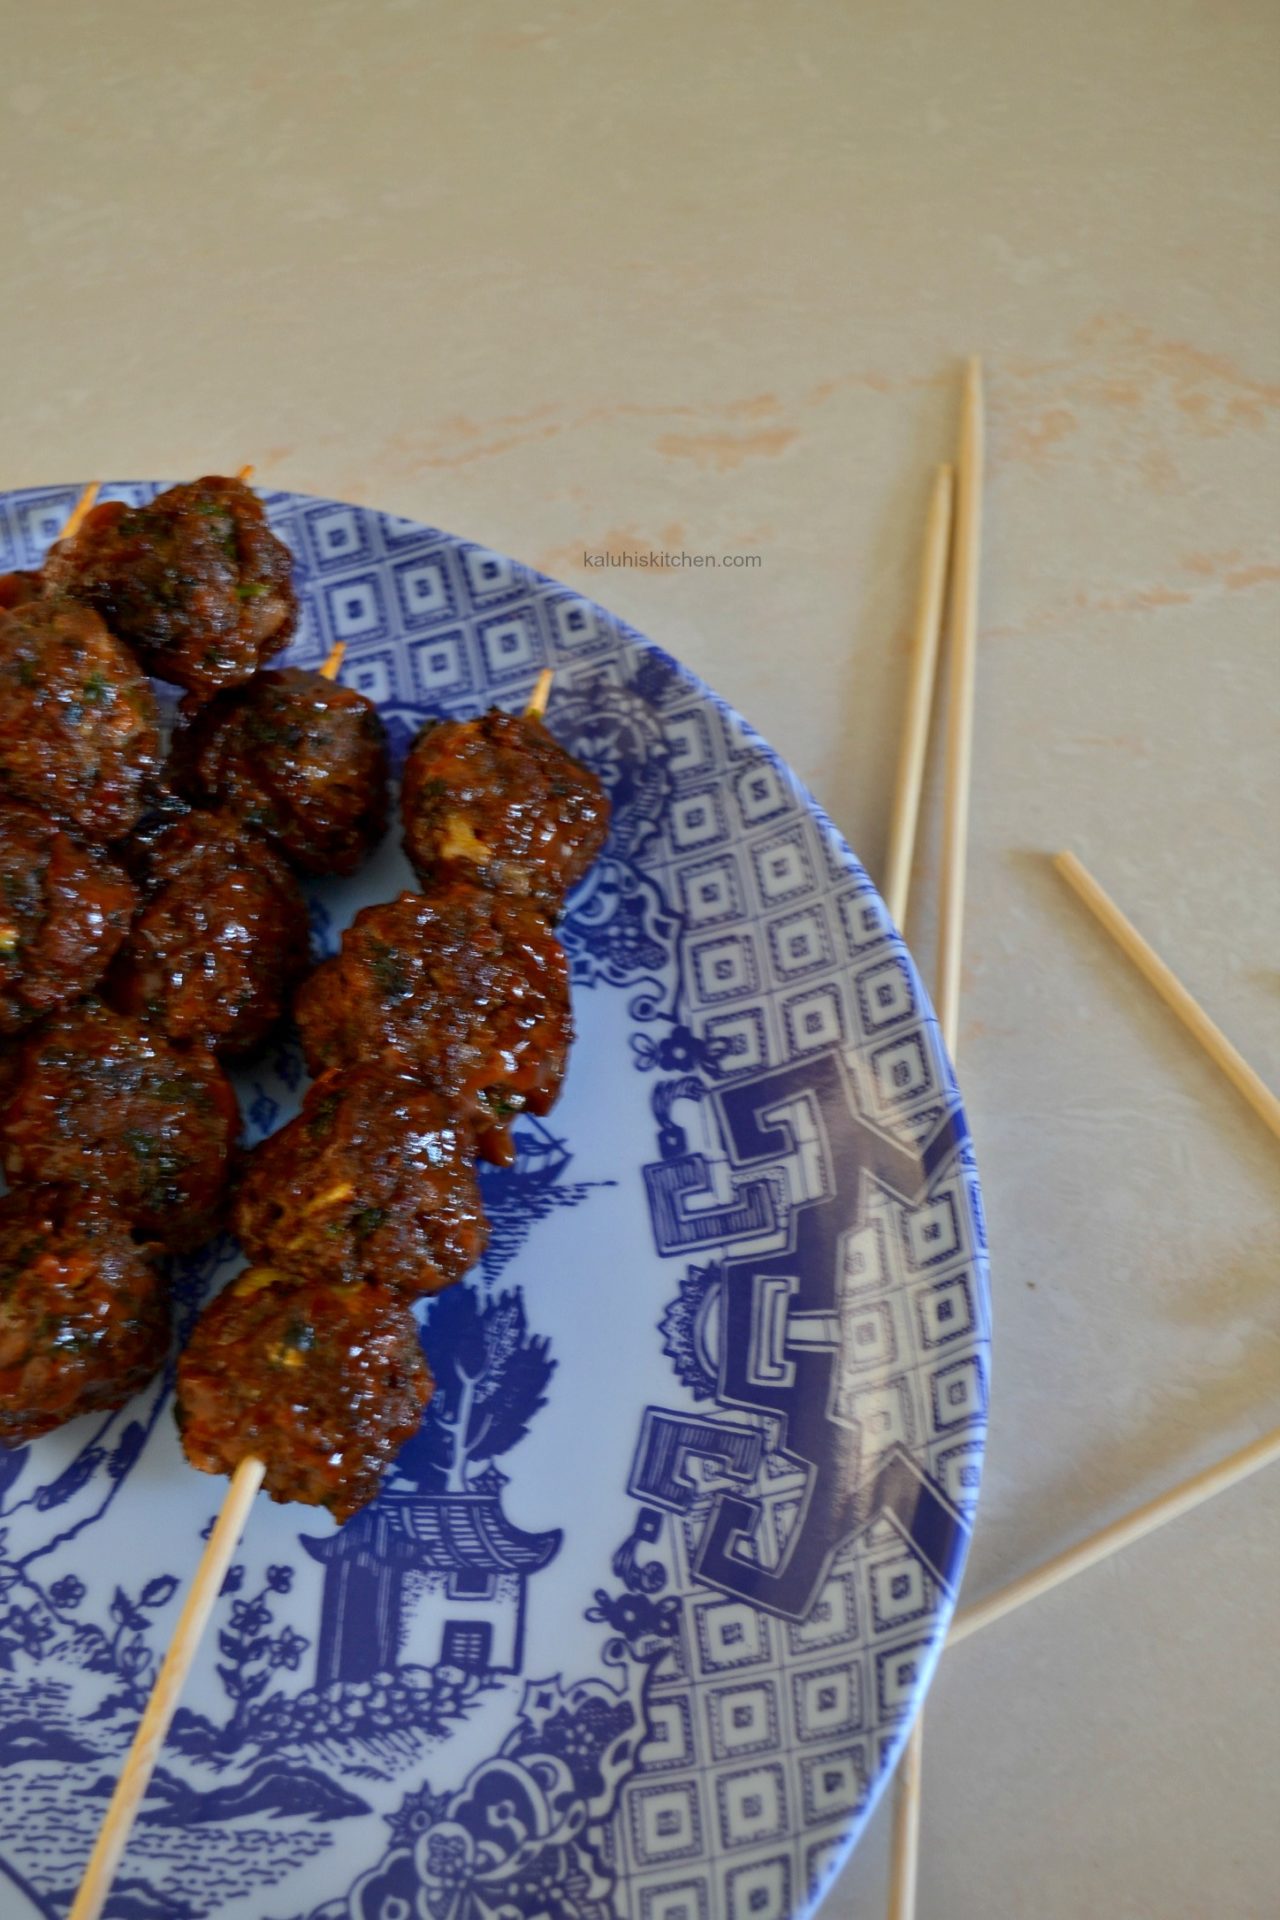 slather your mbuzi meatballs in barbeque sauce then proceed to skewer them_how to make mshikaki_kenyan food_kaluhiskitchen.com